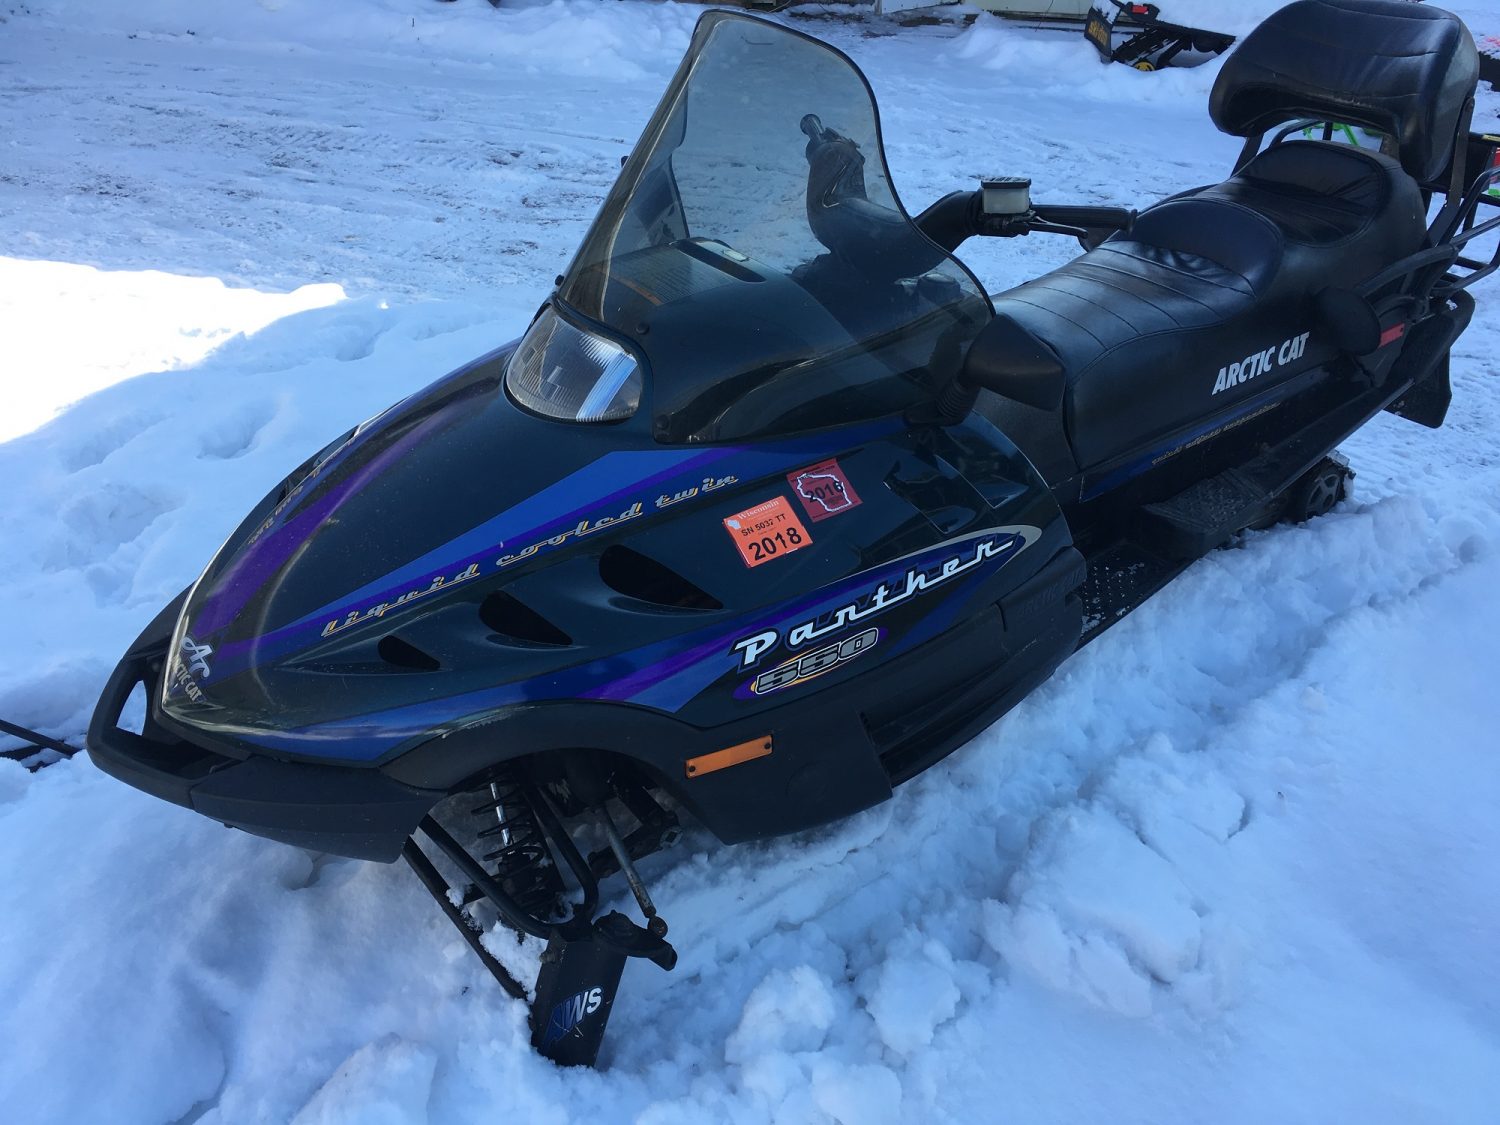 Thaw closes some Lincoln County snowmobile trails